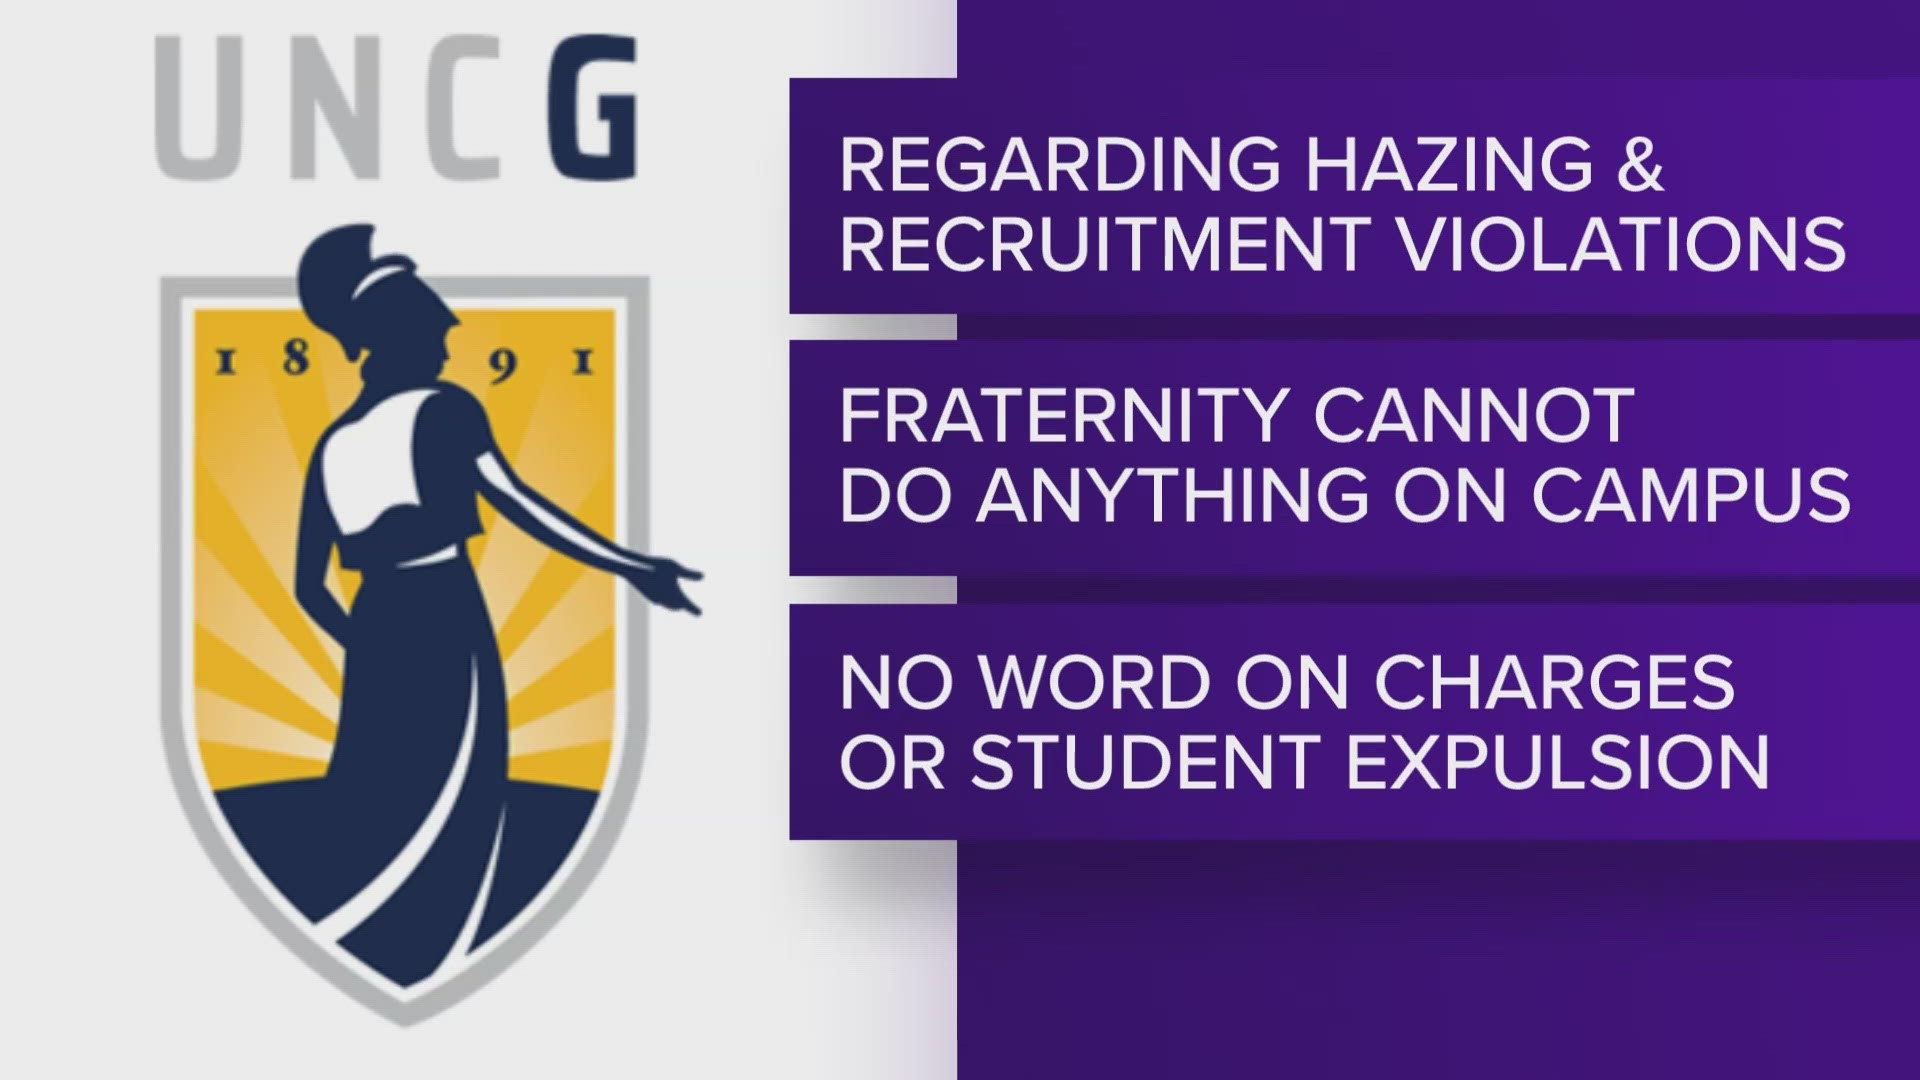 Sigma Phi Epsilon will be removed from UNCG after being accused of hazing and recruitment violations.